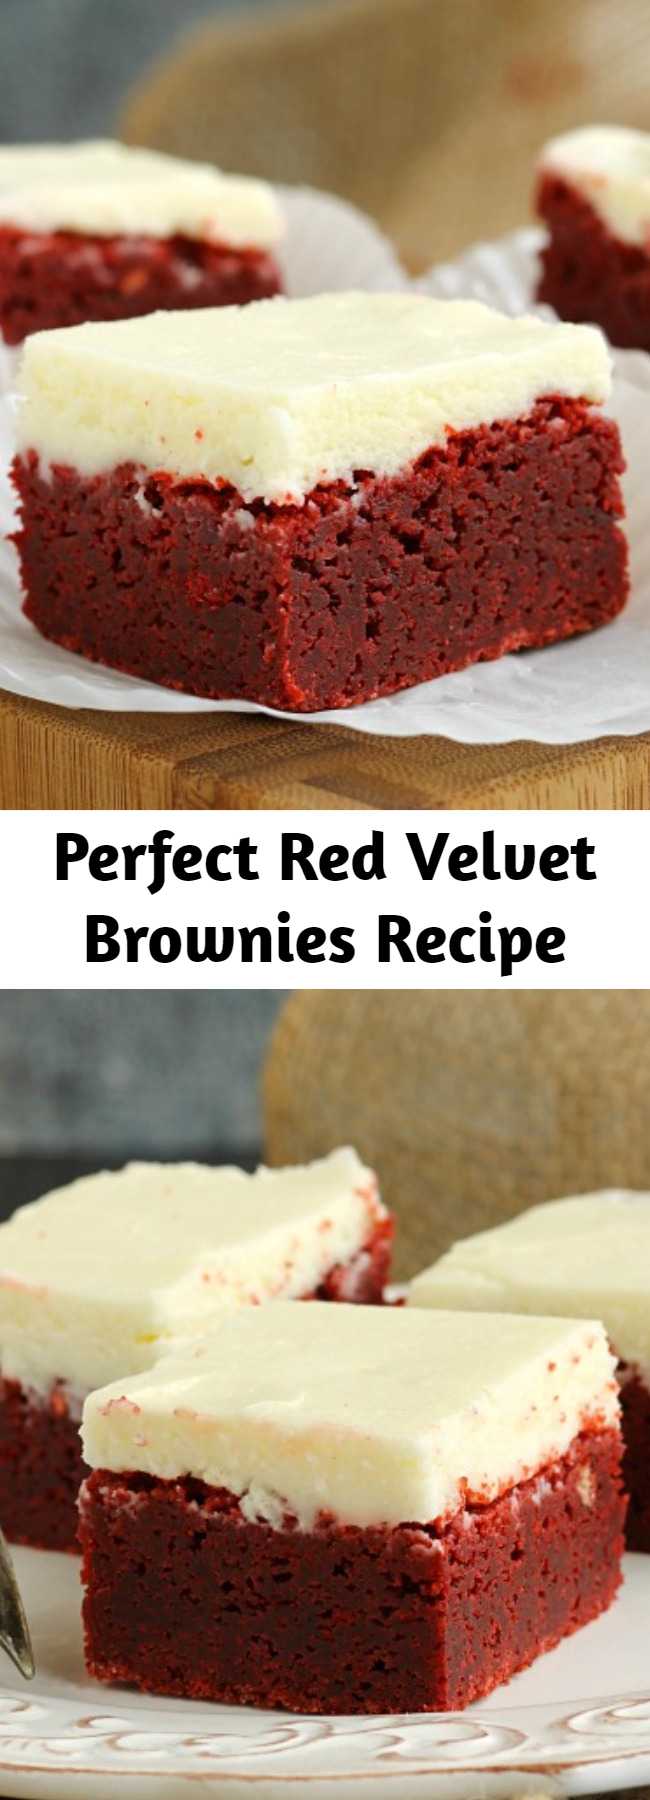 Perfect Red Velvet Brownies Recipe - A classic cake is made into rich, dense and delicious brownies. Smother them in cream cheese frosting and they're dessert perfection.